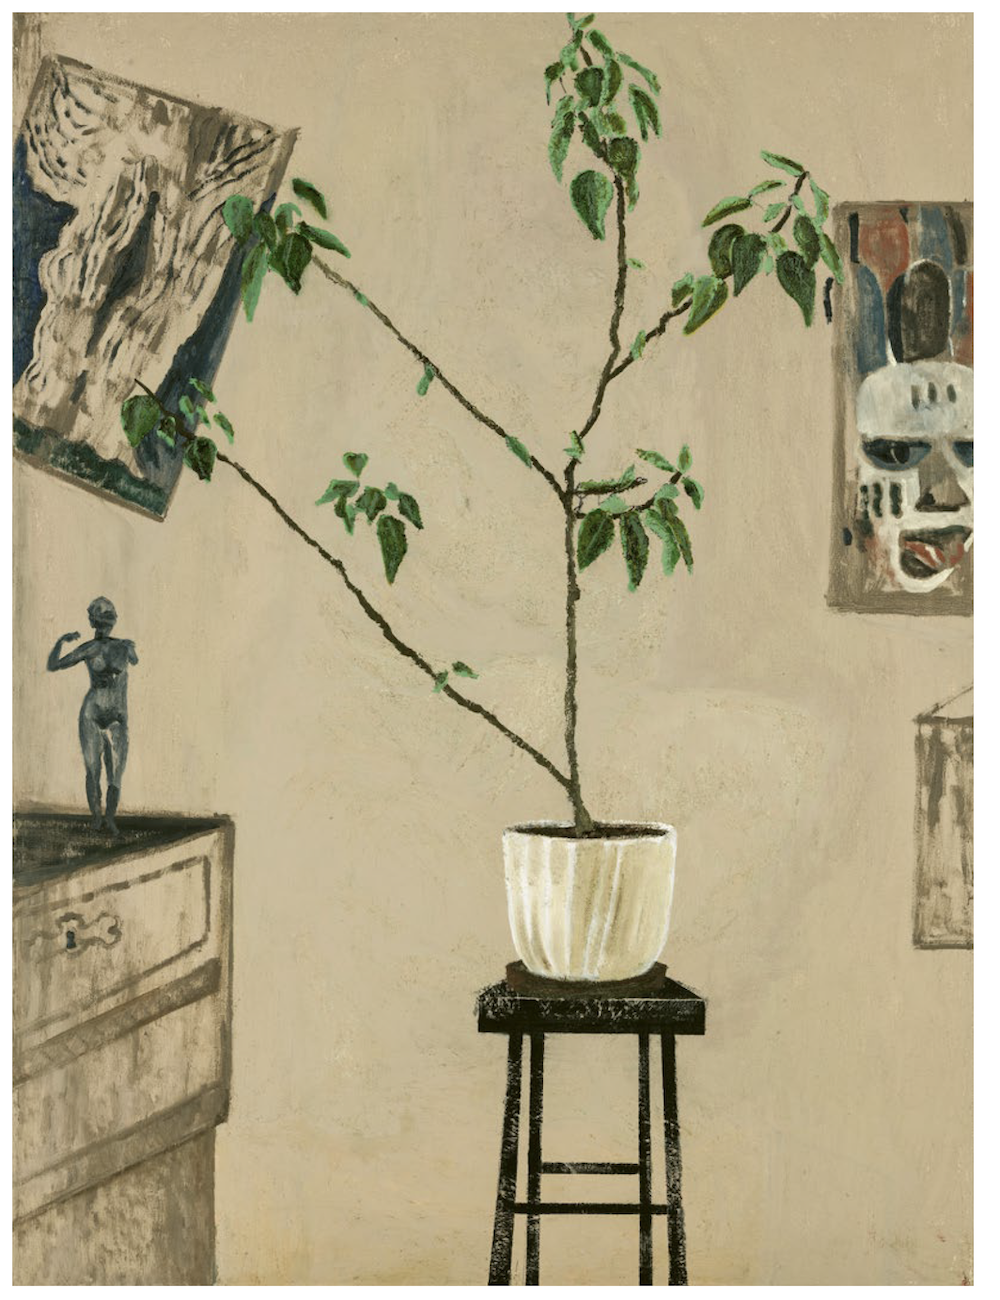 Mamma Andersson, Artefakter med Fikus (Artifacts with Ficus), 2021, oil on canvas, 47 1/4 x 35 3/8". Courtesy the artist and Galleri Magnus Karlsson, Stephen Friedman Gallery, and David Zwirner